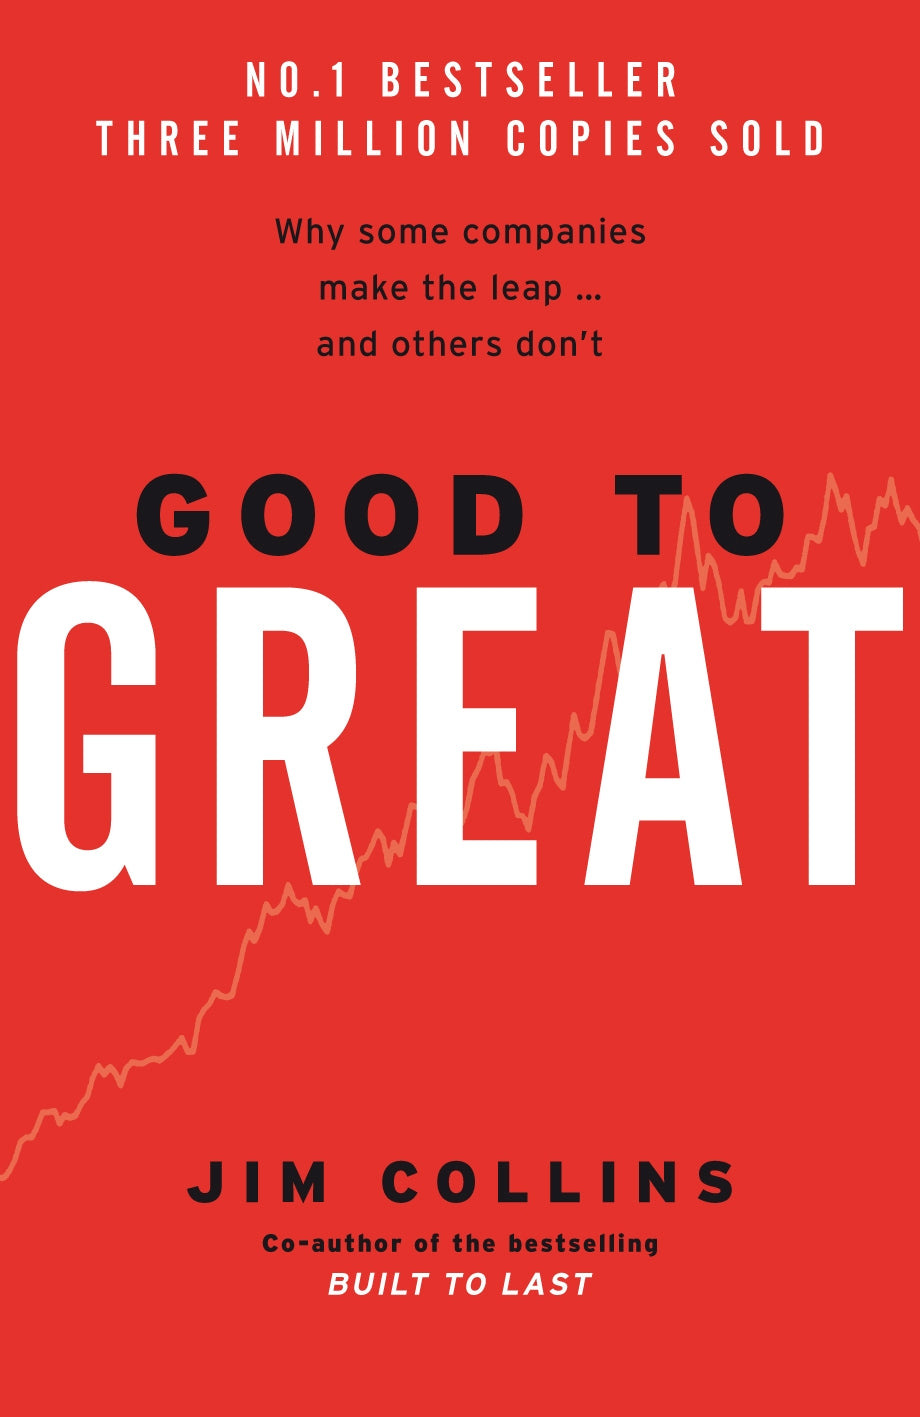 Good To Great by Jim Collins (Hardback)